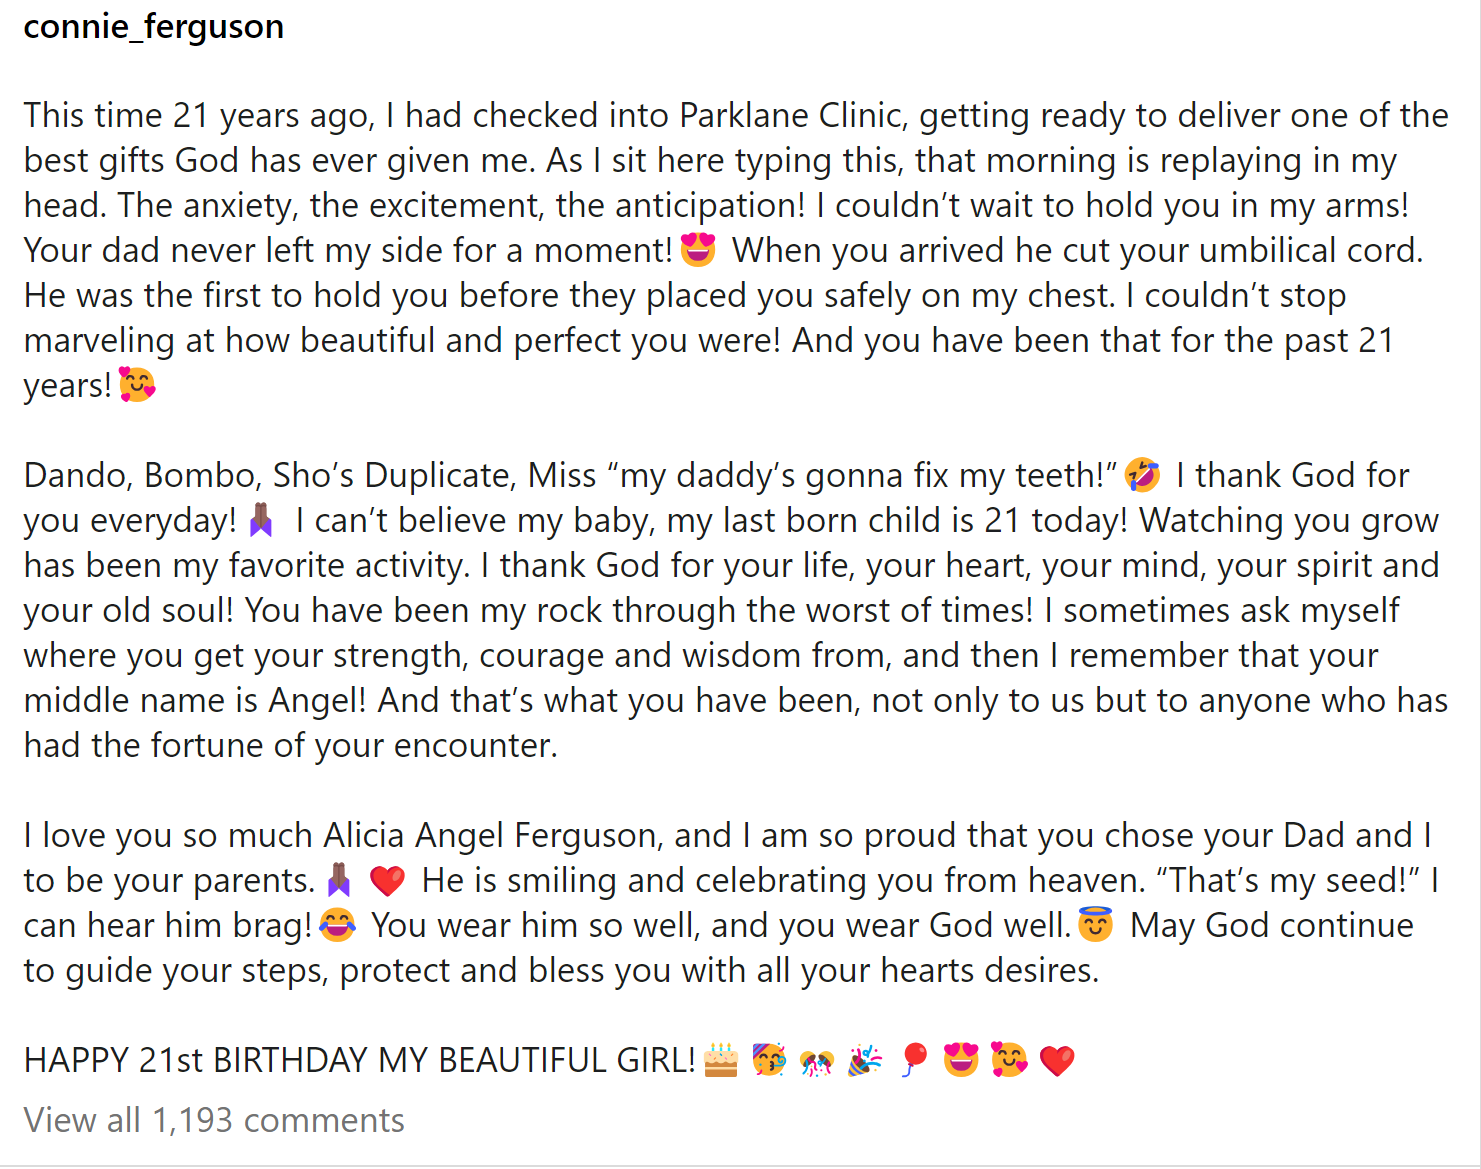 Connie Ferguson Posts Sweet Message For Daughter, Alicia'S 21St Birthday 3